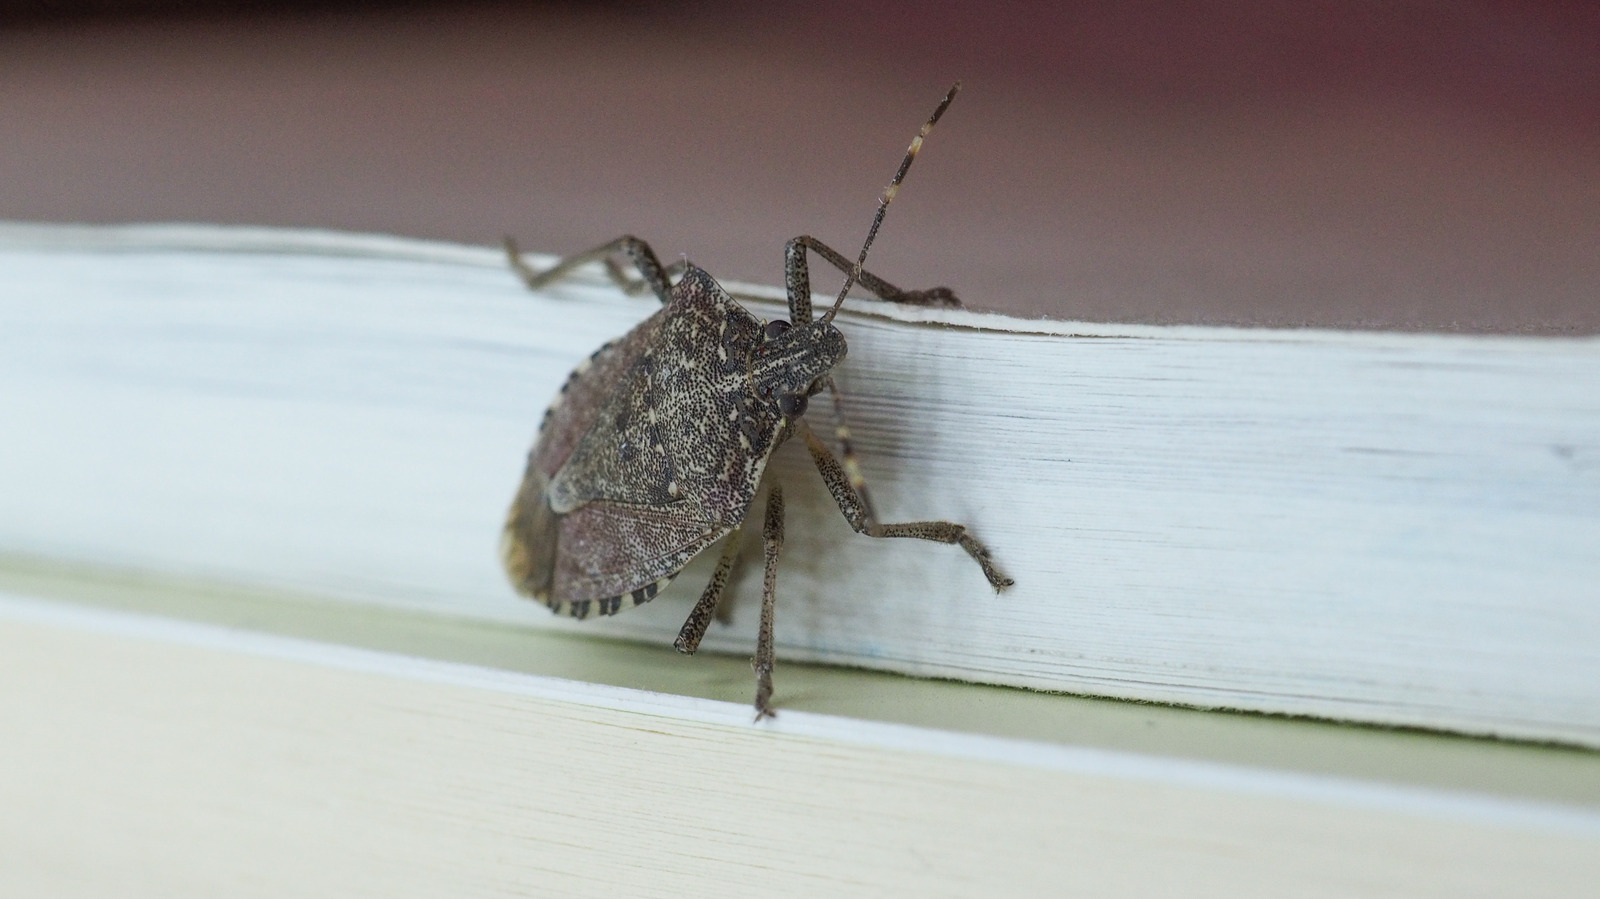 https://www.housedigest.com/img/gallery/how-to-get-rid-of-stink-bugs-in-your-home/l-intro-1664486343.jpg